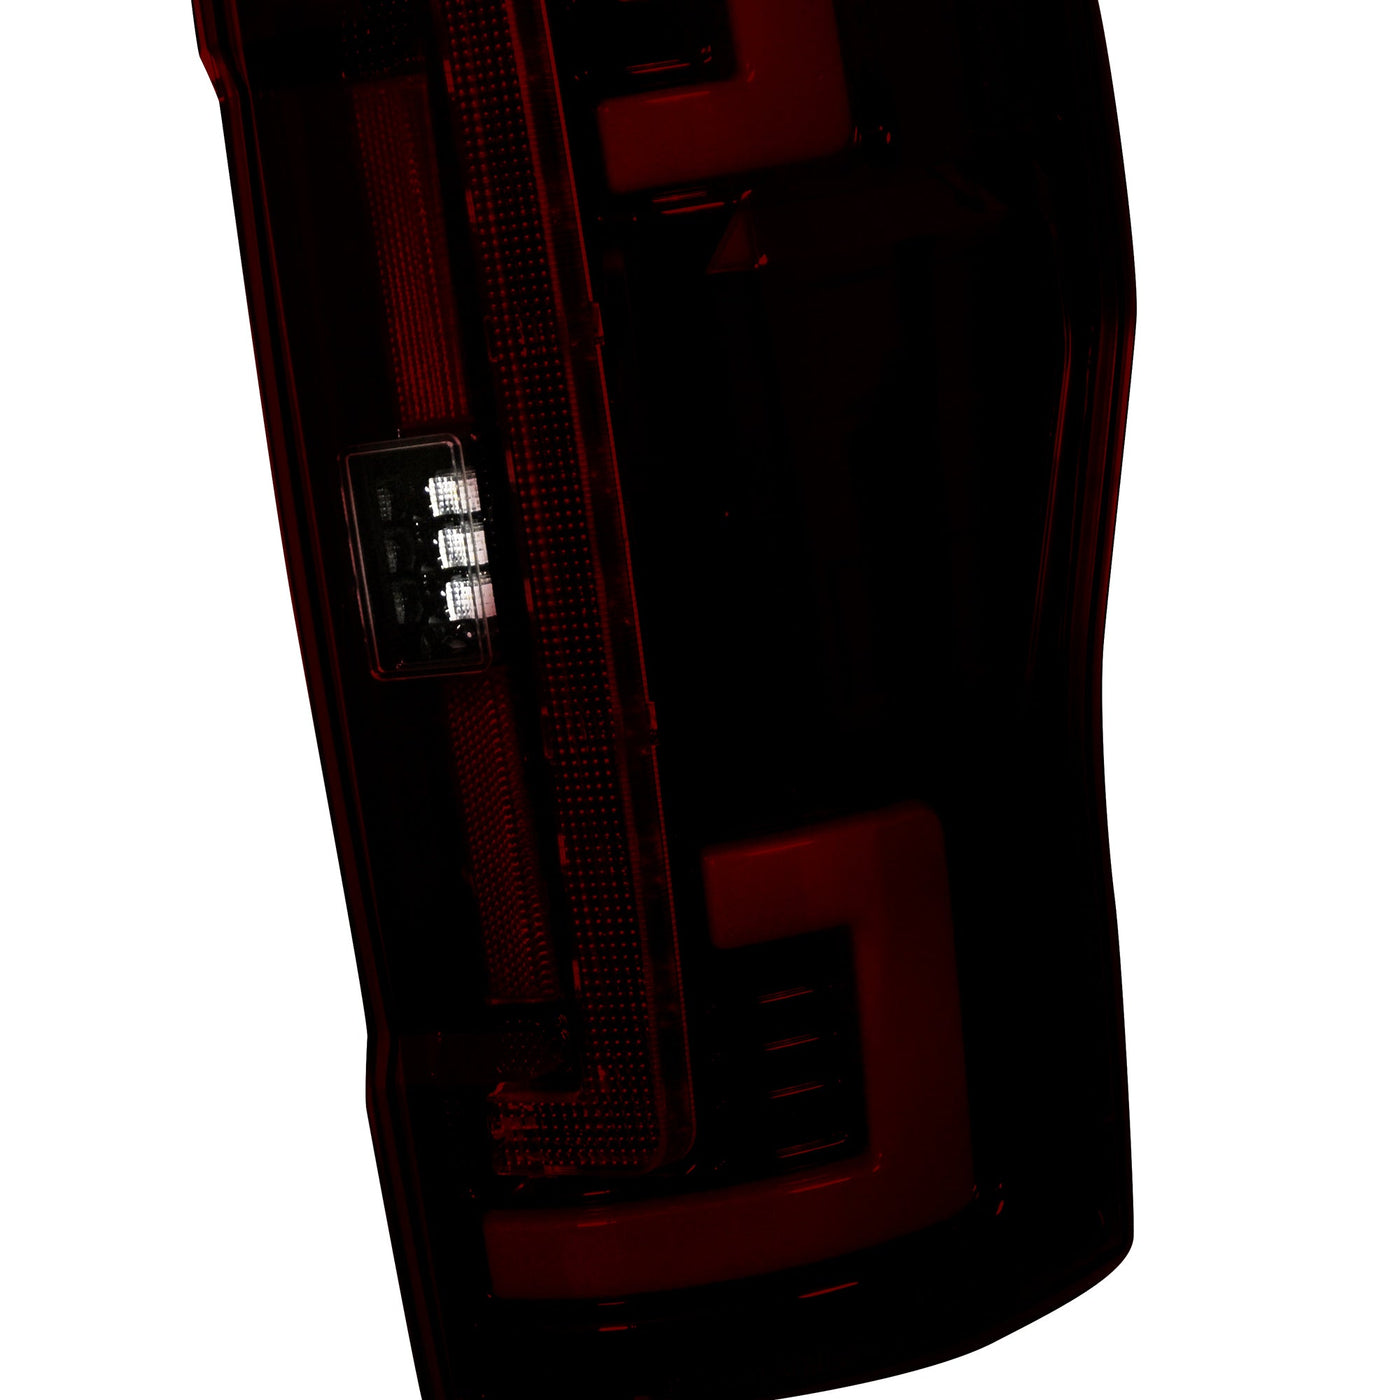 Ford Tail Lights, Ford Super Duty Tail Lights, Super Duty 20-22 Tail Lights, Tail Lights, Dark Red Smoked Tail Lights